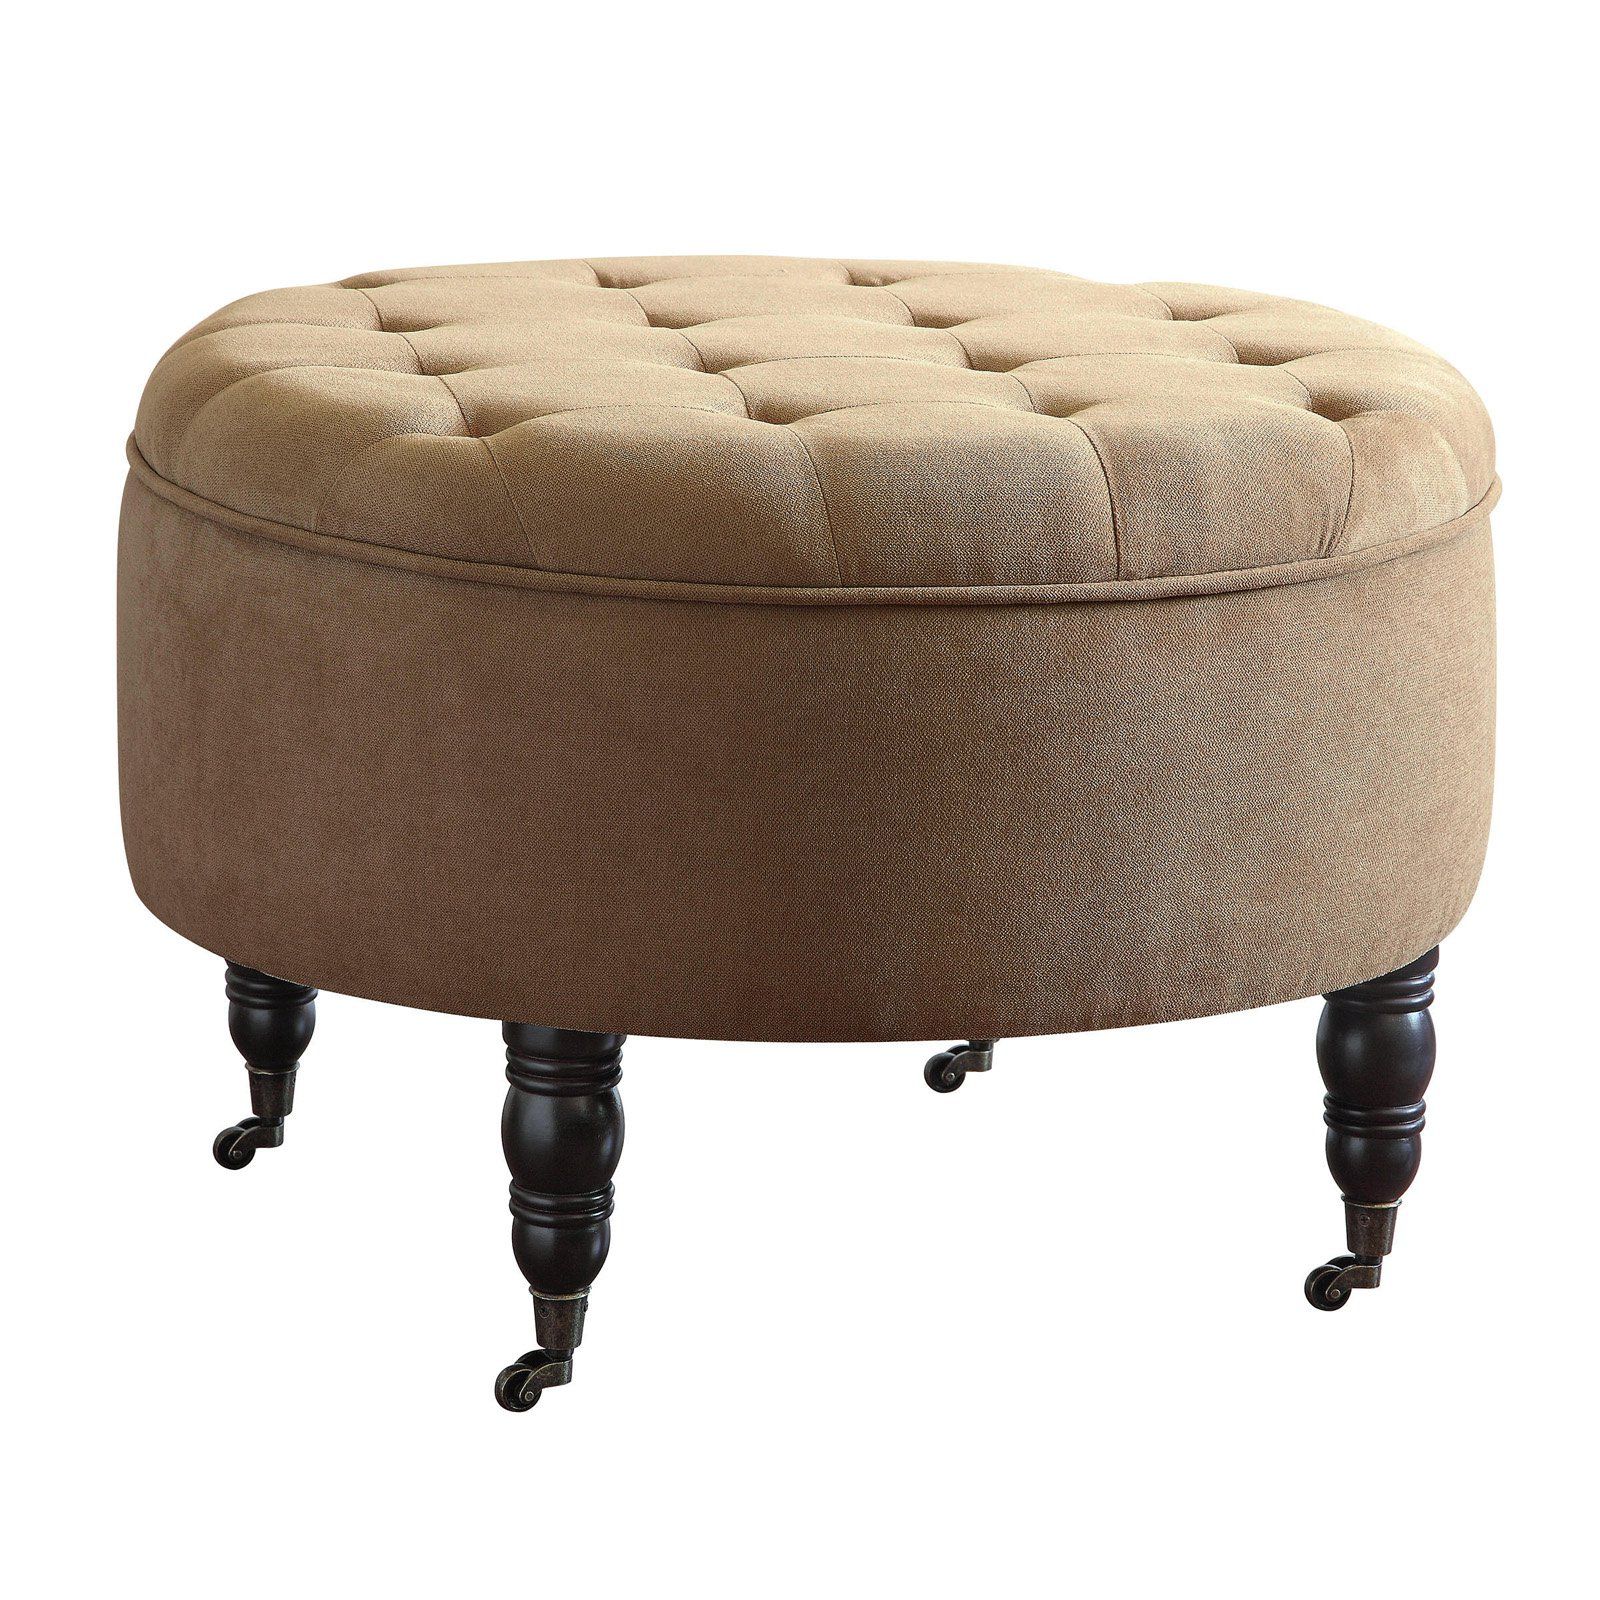 Elle Decor Quinn Round Tufted Ottoman With Storage And Casters With Regard To Fabric Tufted Round Storage Ottomans (View 2 of 20)